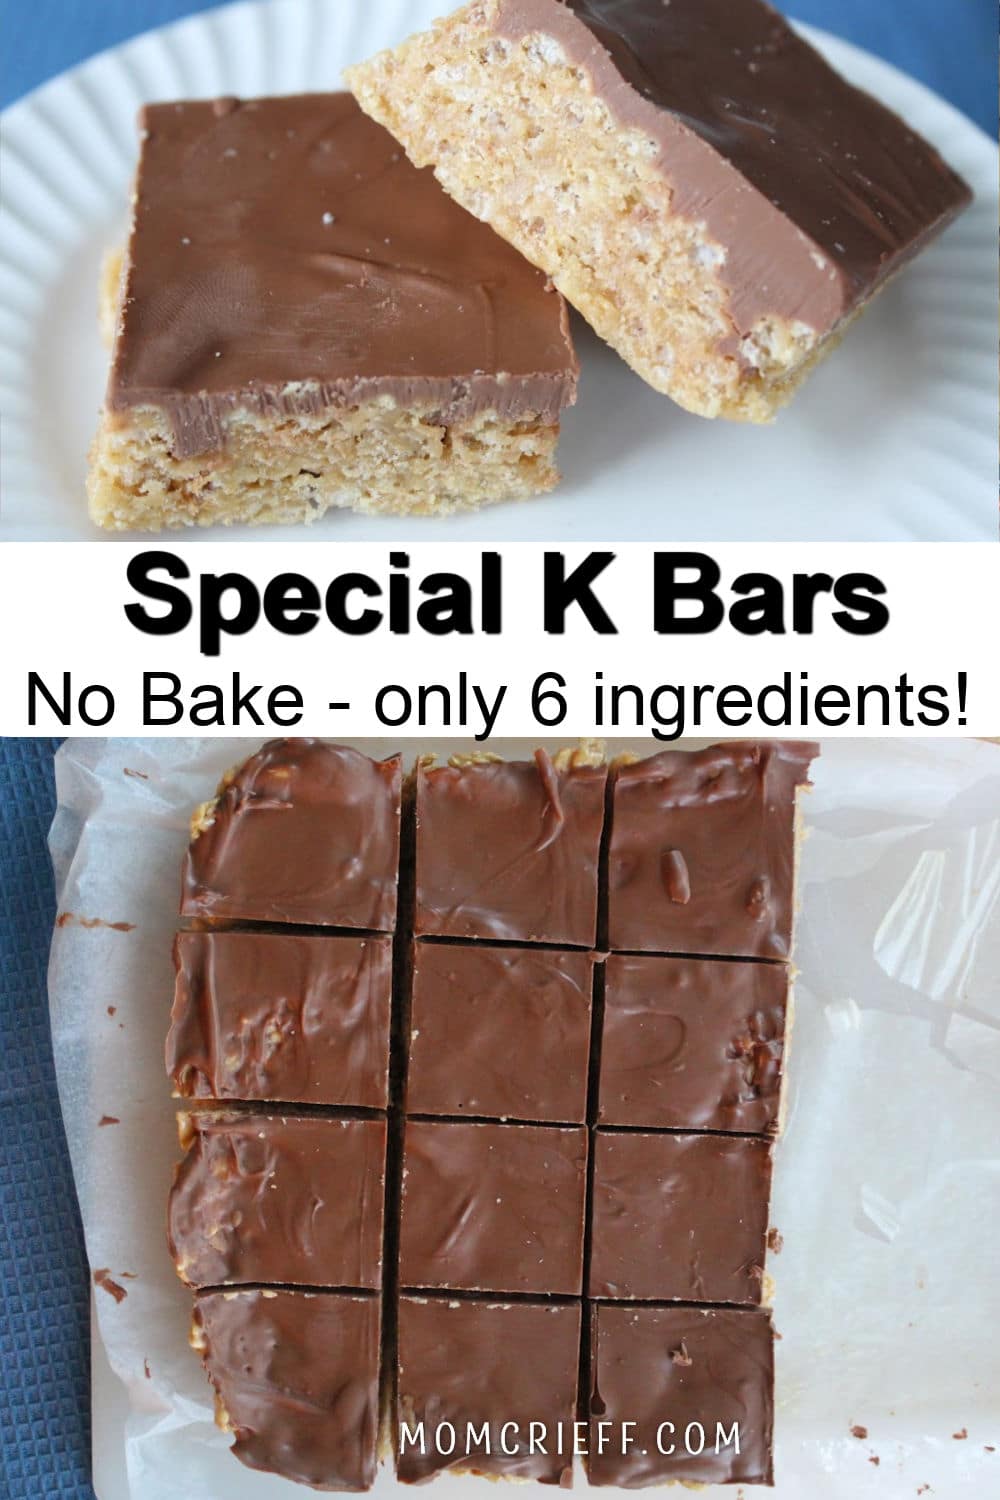 lower image is of cut Special K bars. Upper image is a close up of two special K bars.